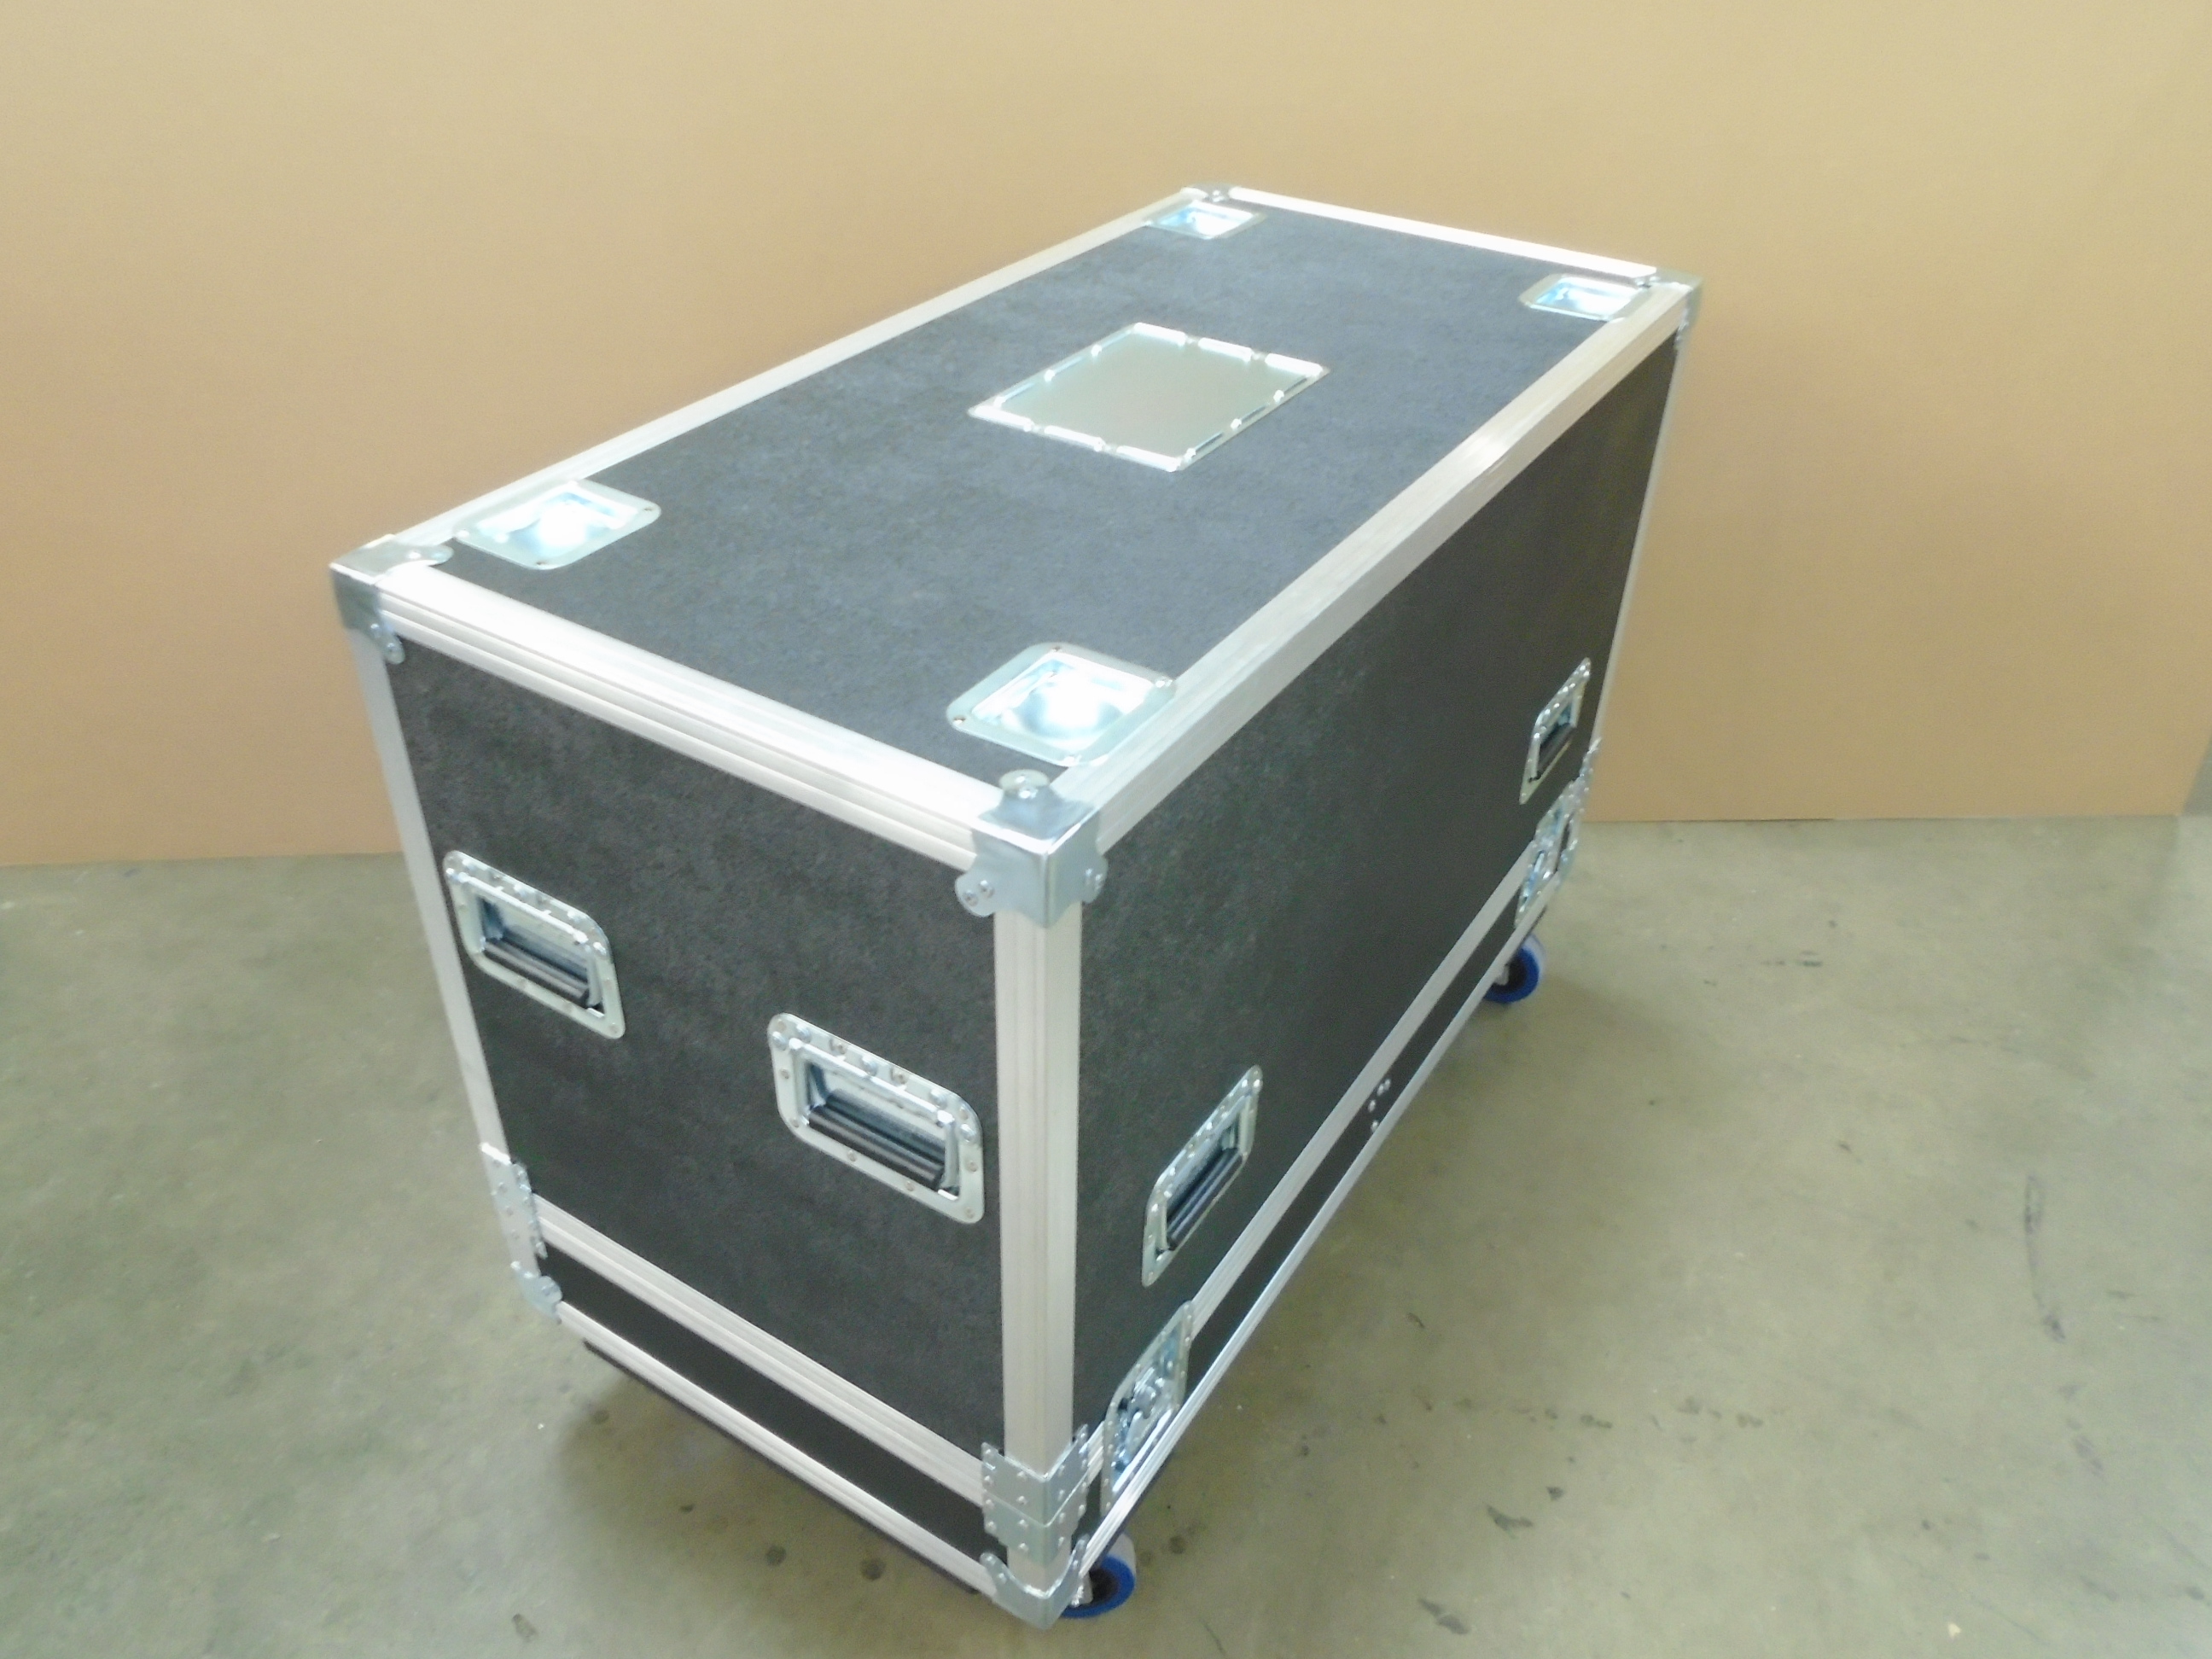 Print # 8876 - Custom Low Base Road Case for 2-Pack JBL ASB6115 Compact Single 15" Subwoofer Kit By Nelson Case Corp